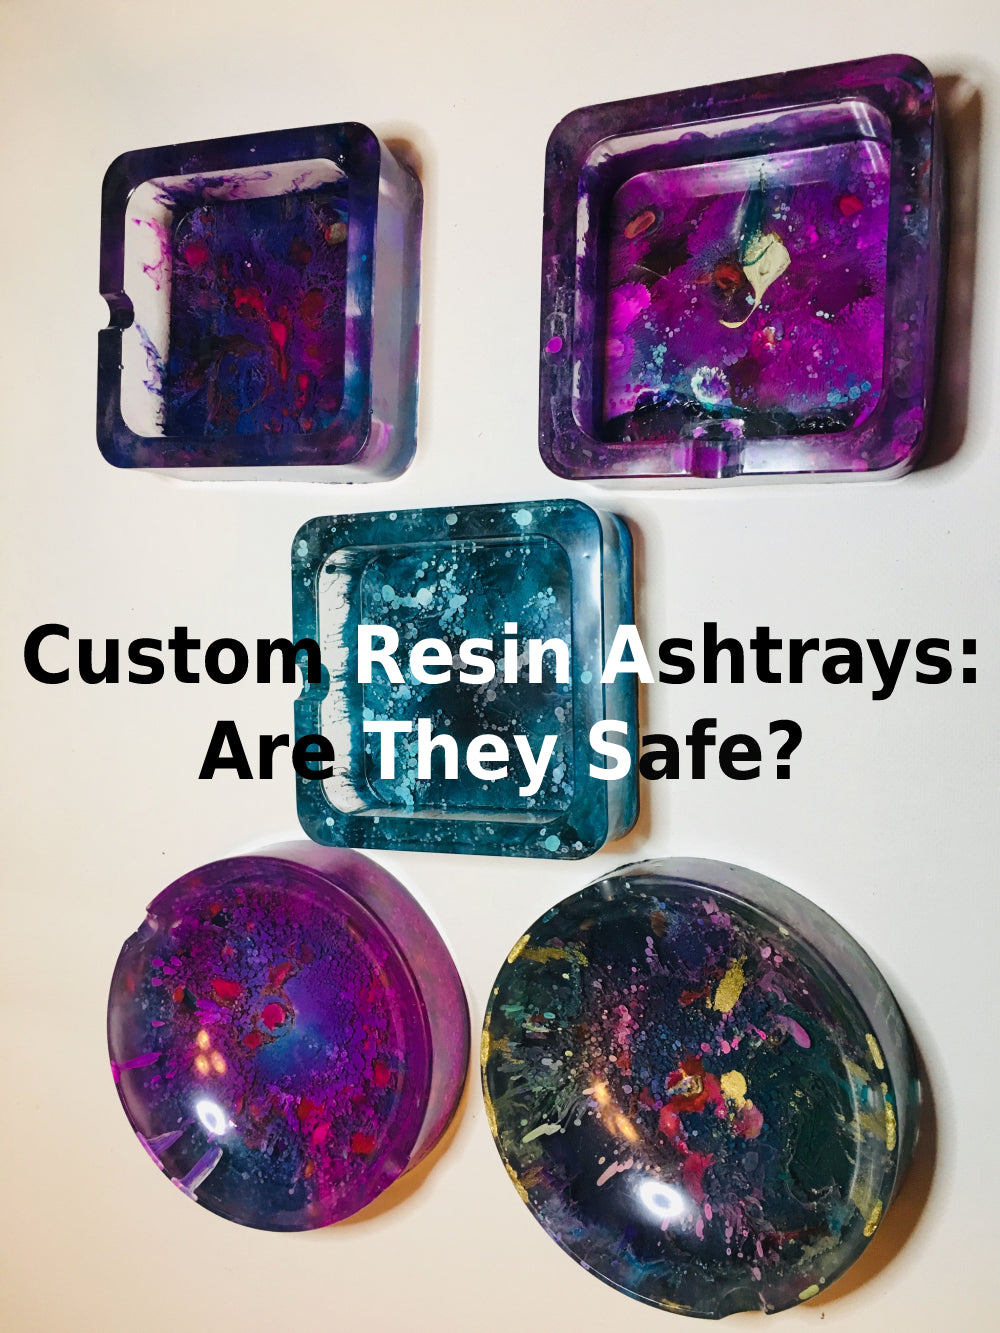 Custom Resin Ashtrays: Are They Safe?